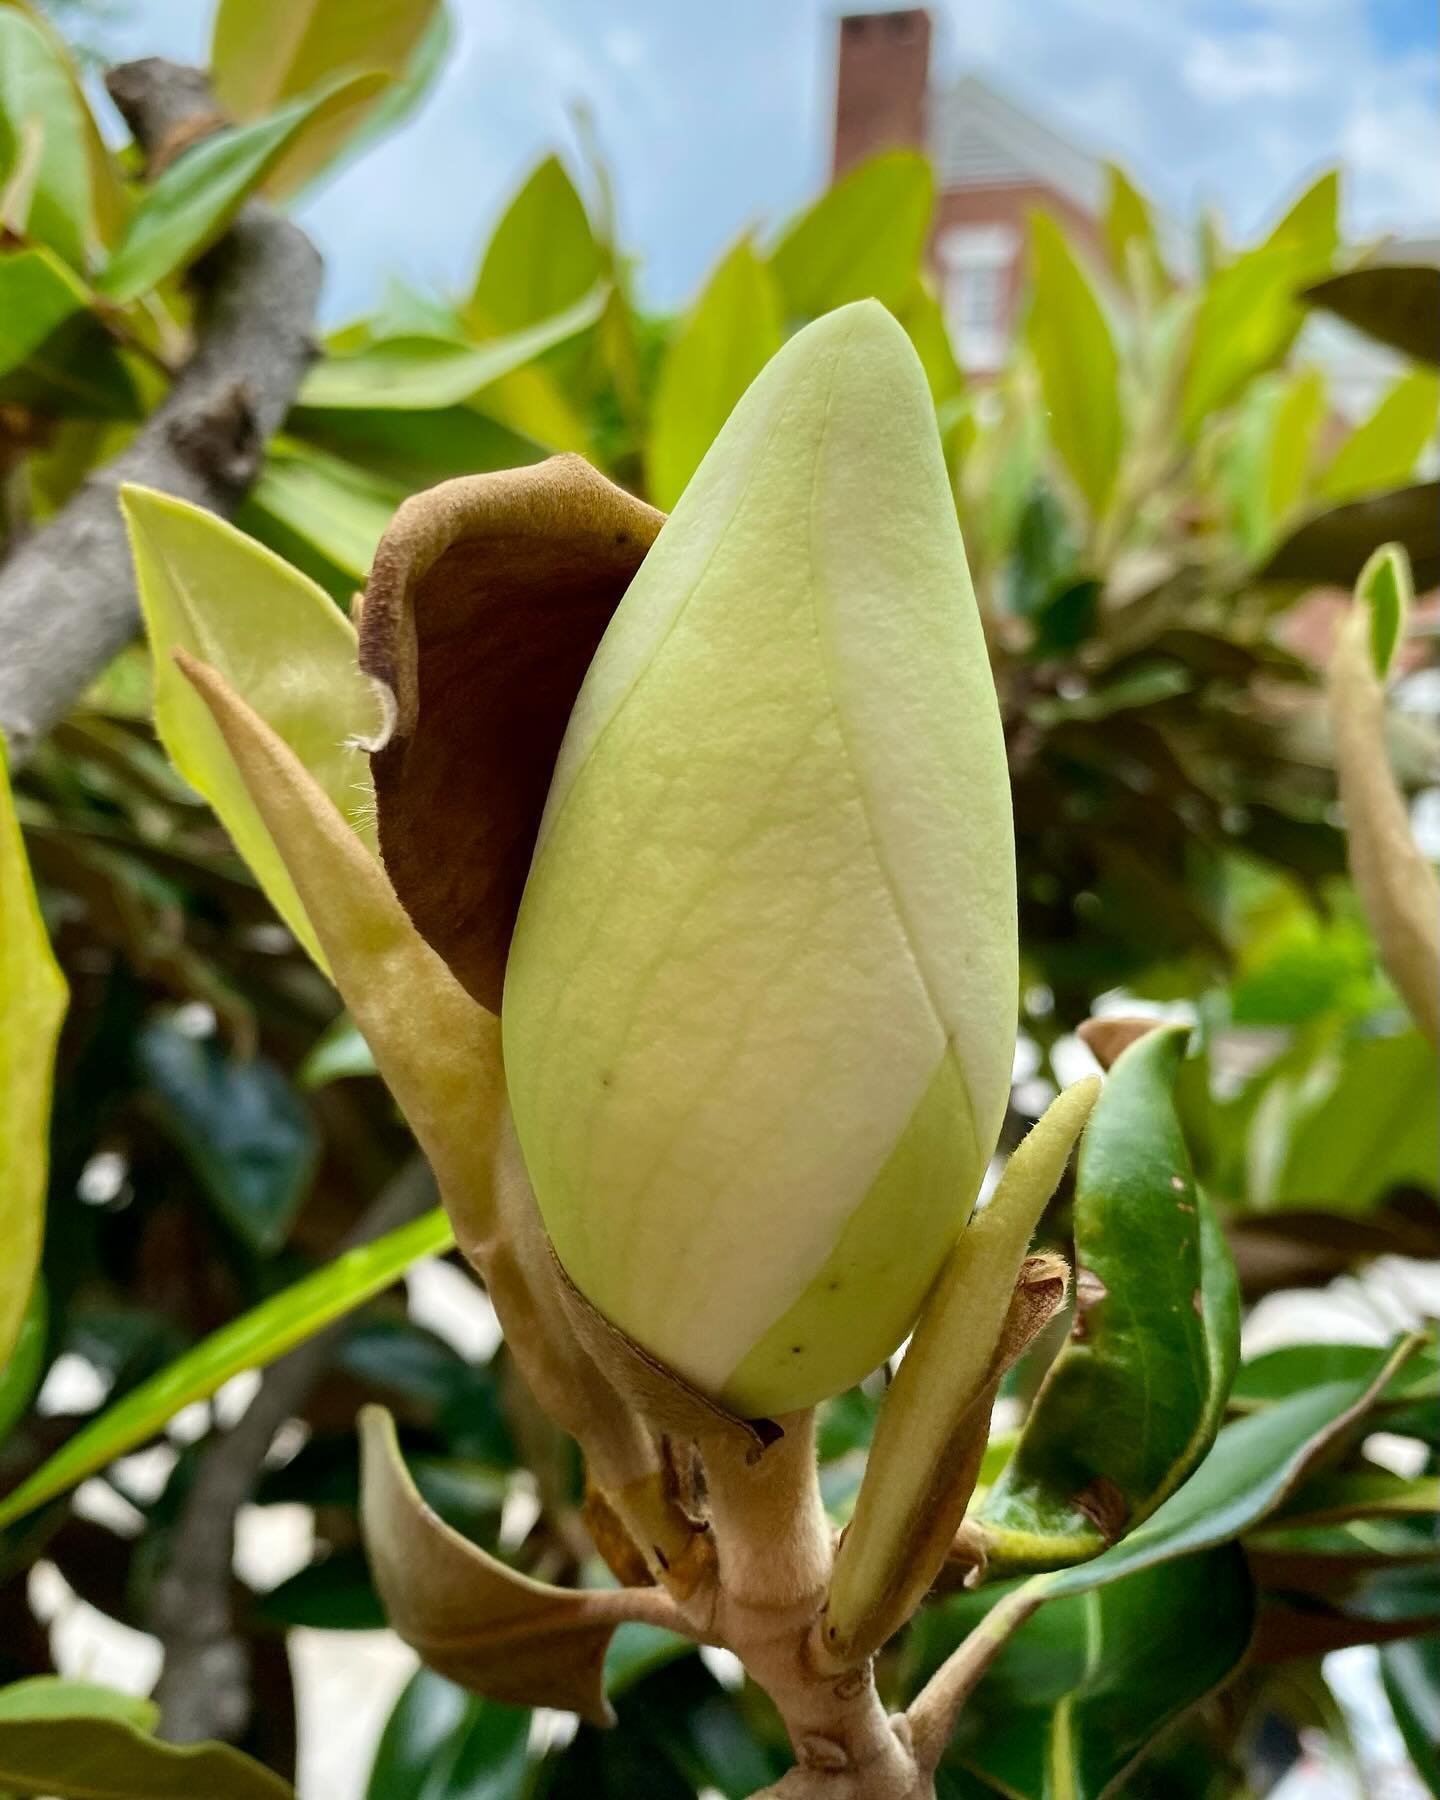 It&rsquo;s Officially Magnolia Season! 🌳
&bull;
The grand magnolia flower symbolizes endurance, dignity, joy, and everlasting connection. A long-standing symbol of Southern hospitality, the @bluffviewartdistrict has embraced this fragrant perennial 